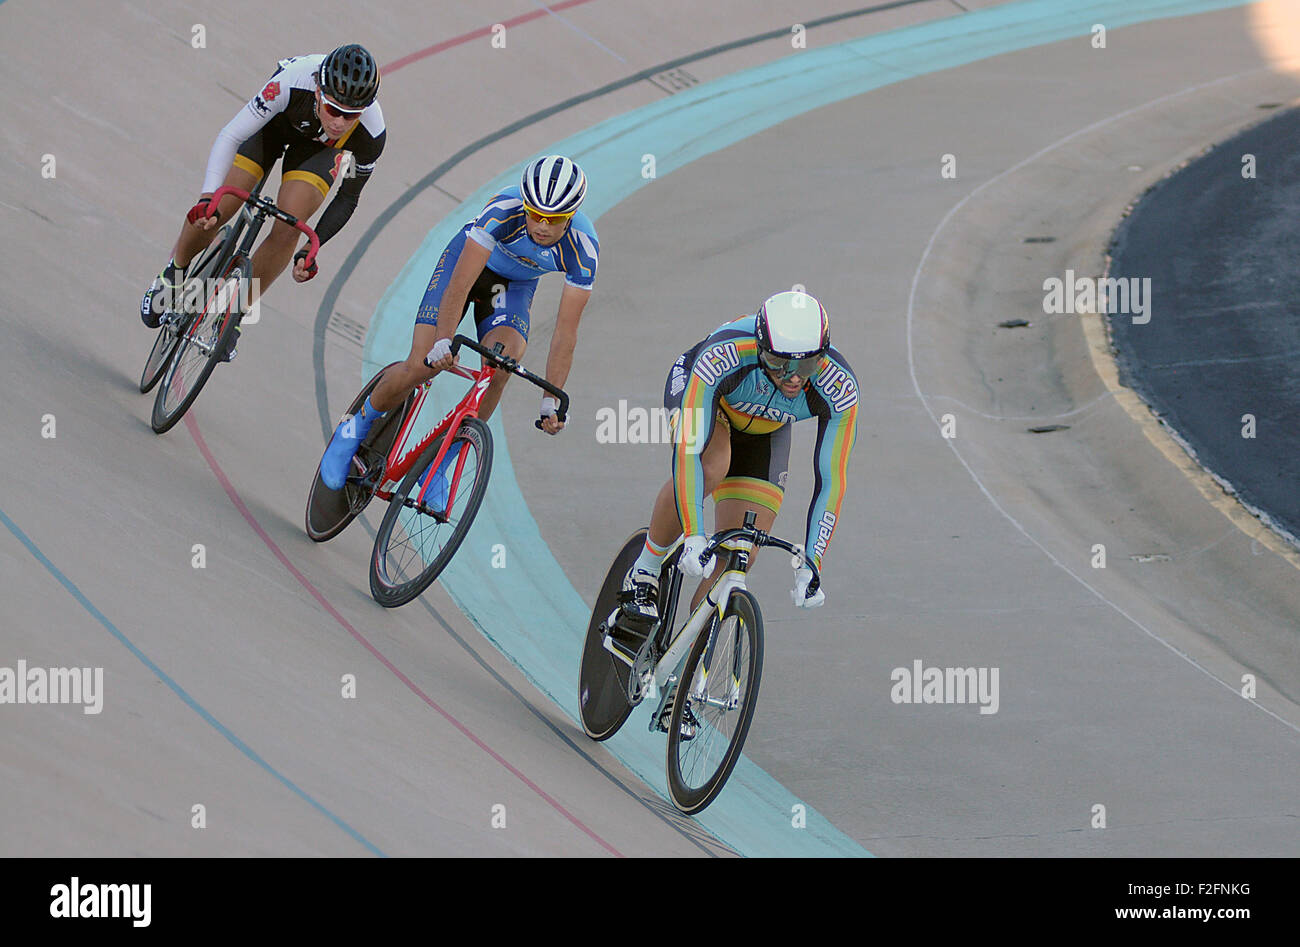 Colorado Springs, Colorado, USA. 17th Sep, 2015. UC-San Diego's, Todd Woodland (l), Fort Lewis College's, Emanuel Gagne (center), and Midwestern State's, Joshua Buchel (r), compete in a points race qualifier during the USA Cycling Collegiate Track National Championships, United States Olympic Training Center Velodrome, Colorado Springs, Colorado. Credit:  csm/Alamy Live News Stock Photo